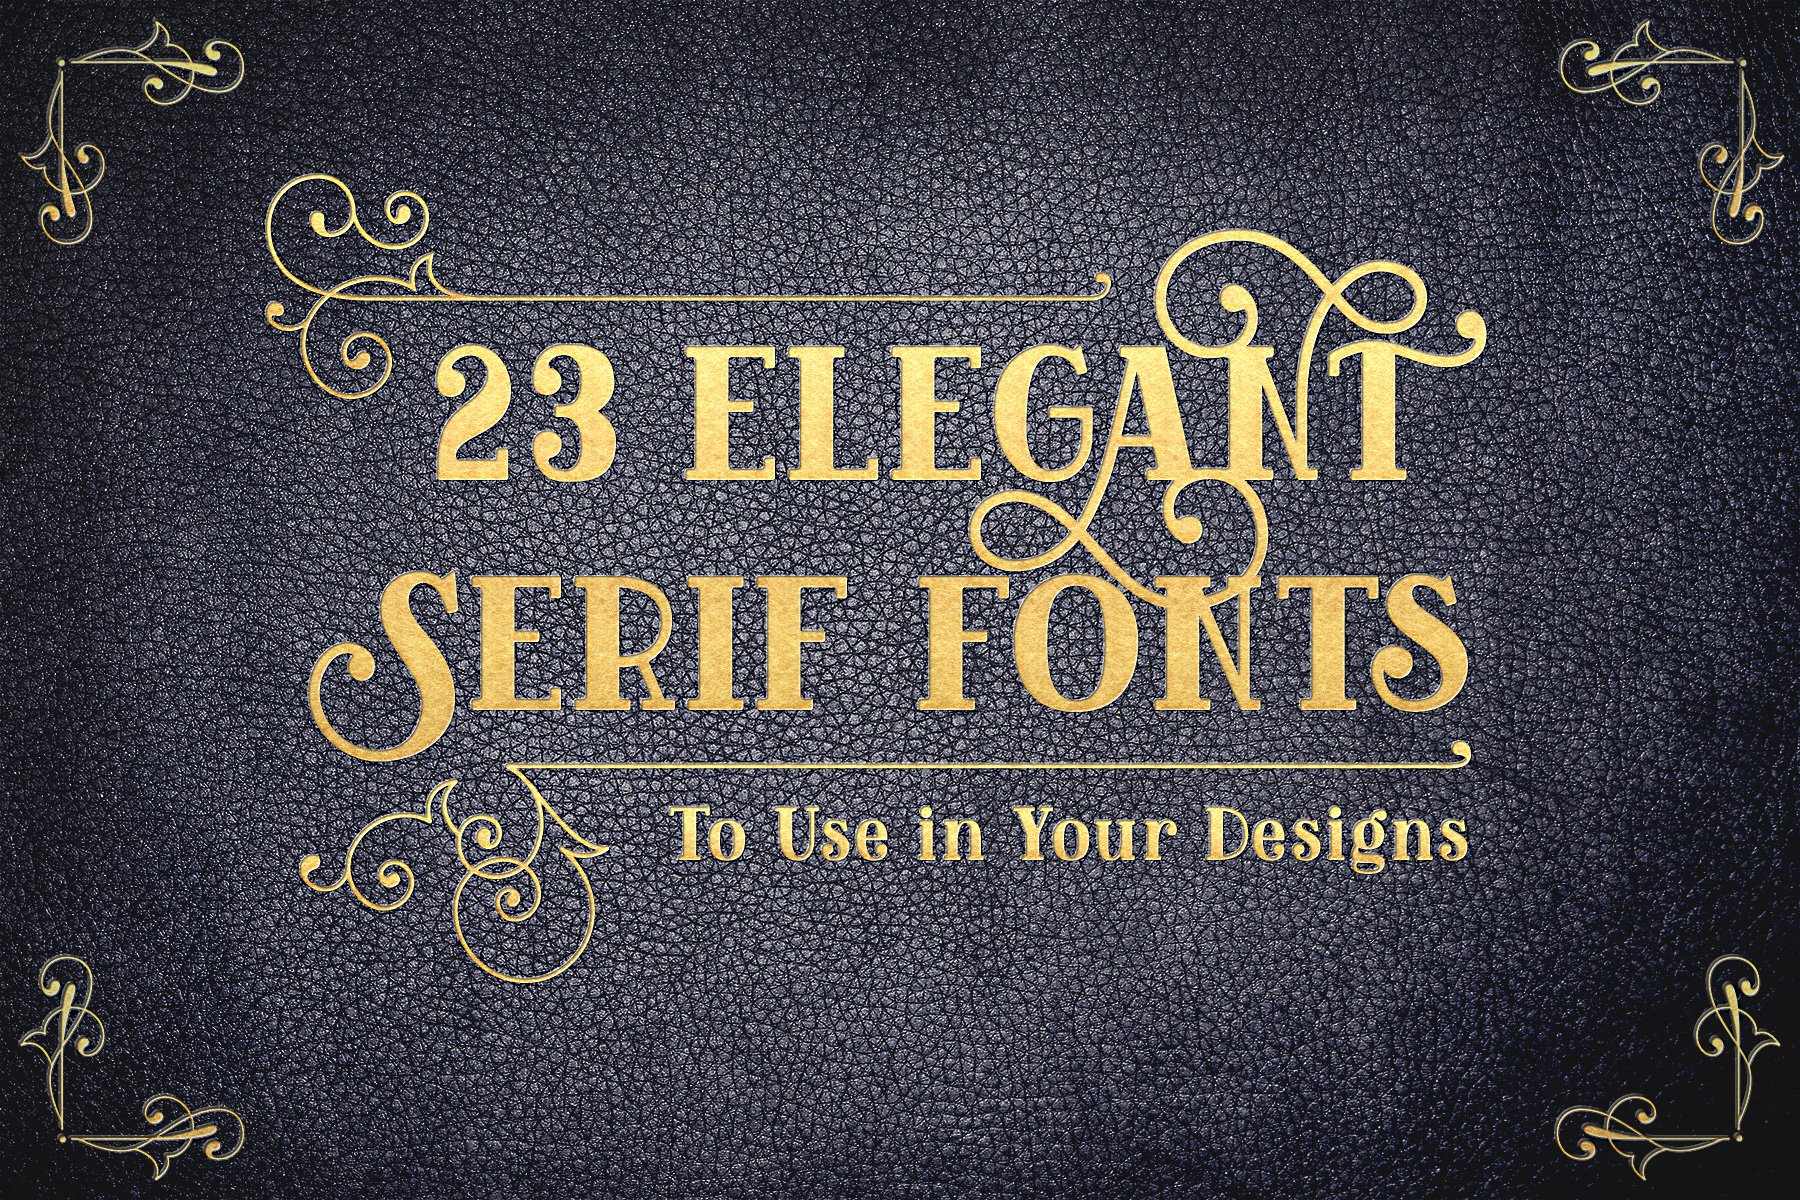 23 Elegant Serif Fonts to Use in Your Designs